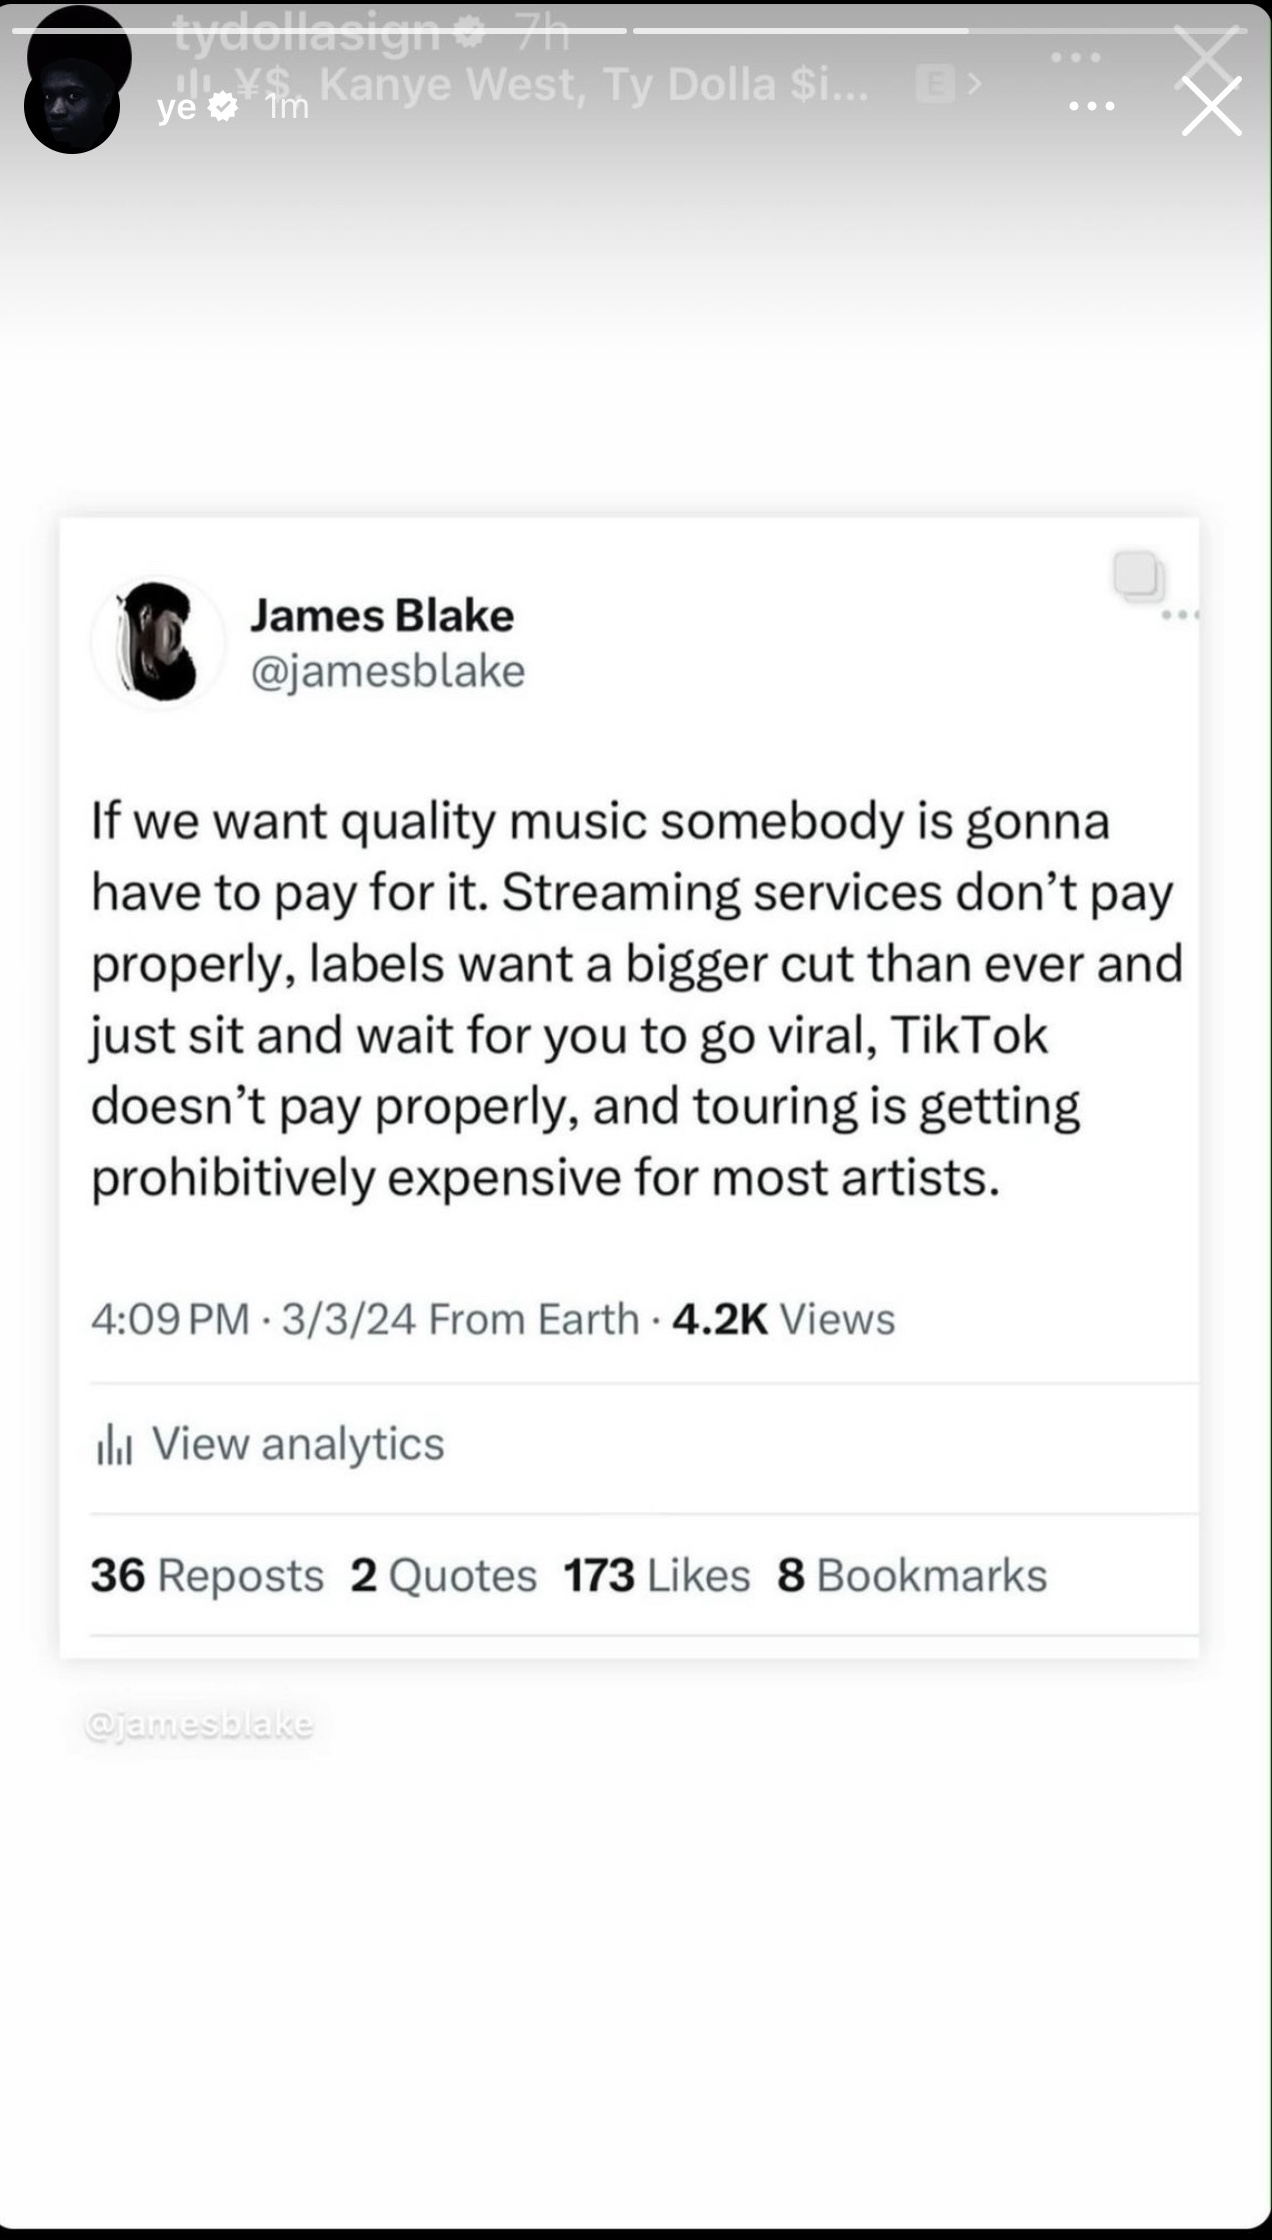 A screenshot of a tweet by James Blake discussing the challenges of streaming services and artist payment